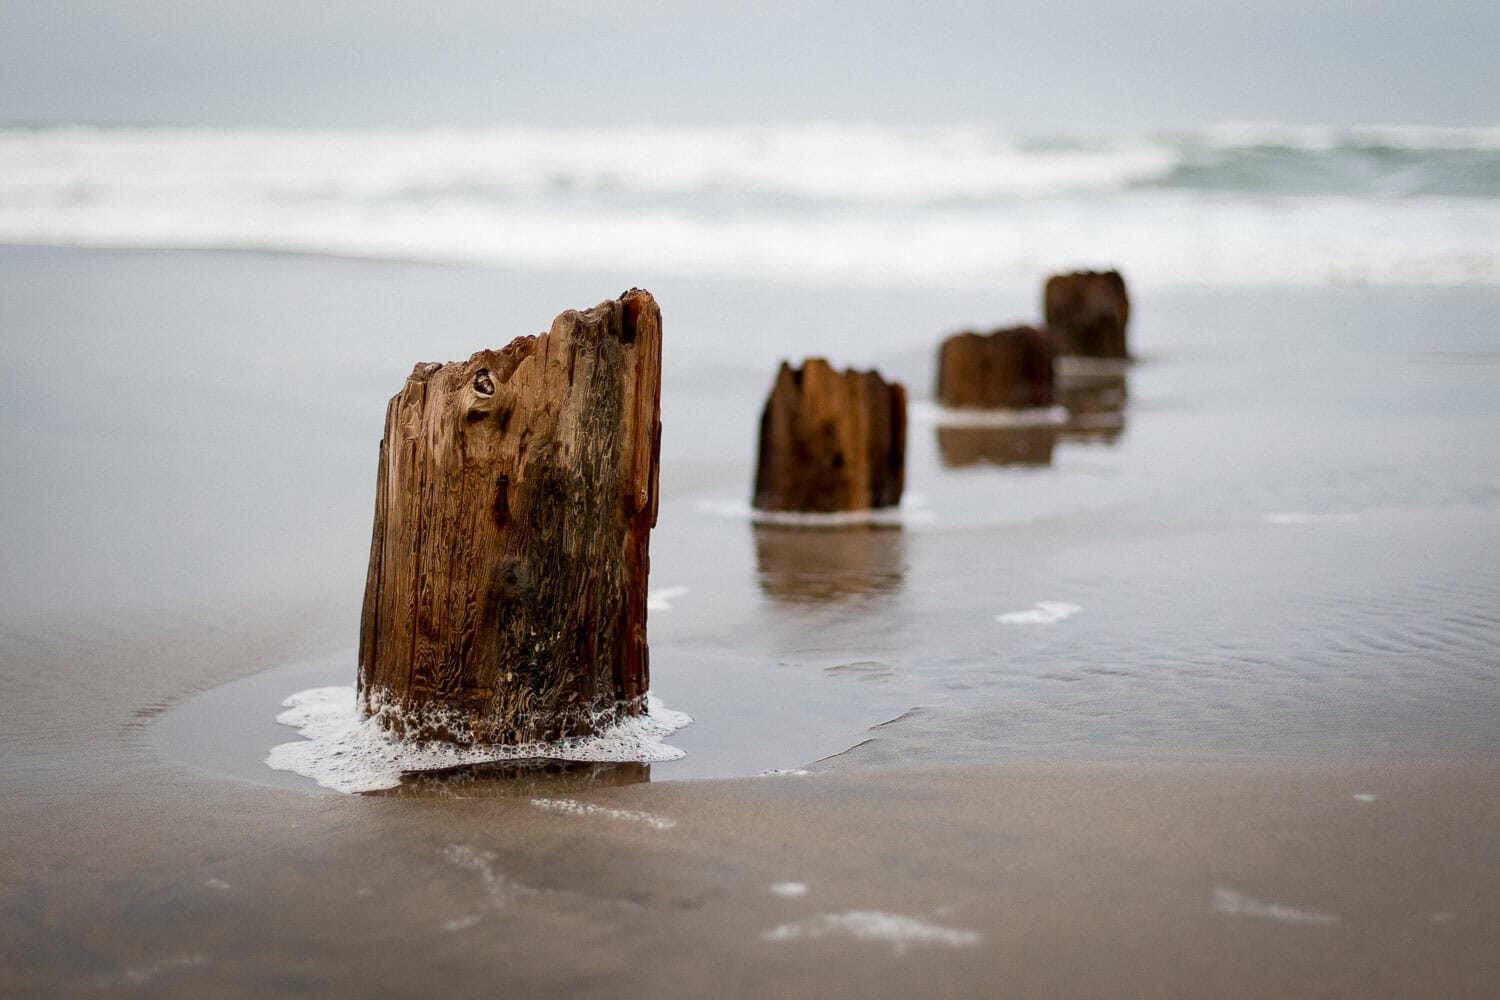 Weathered wooden posts on a sandy beach with waves in the background.